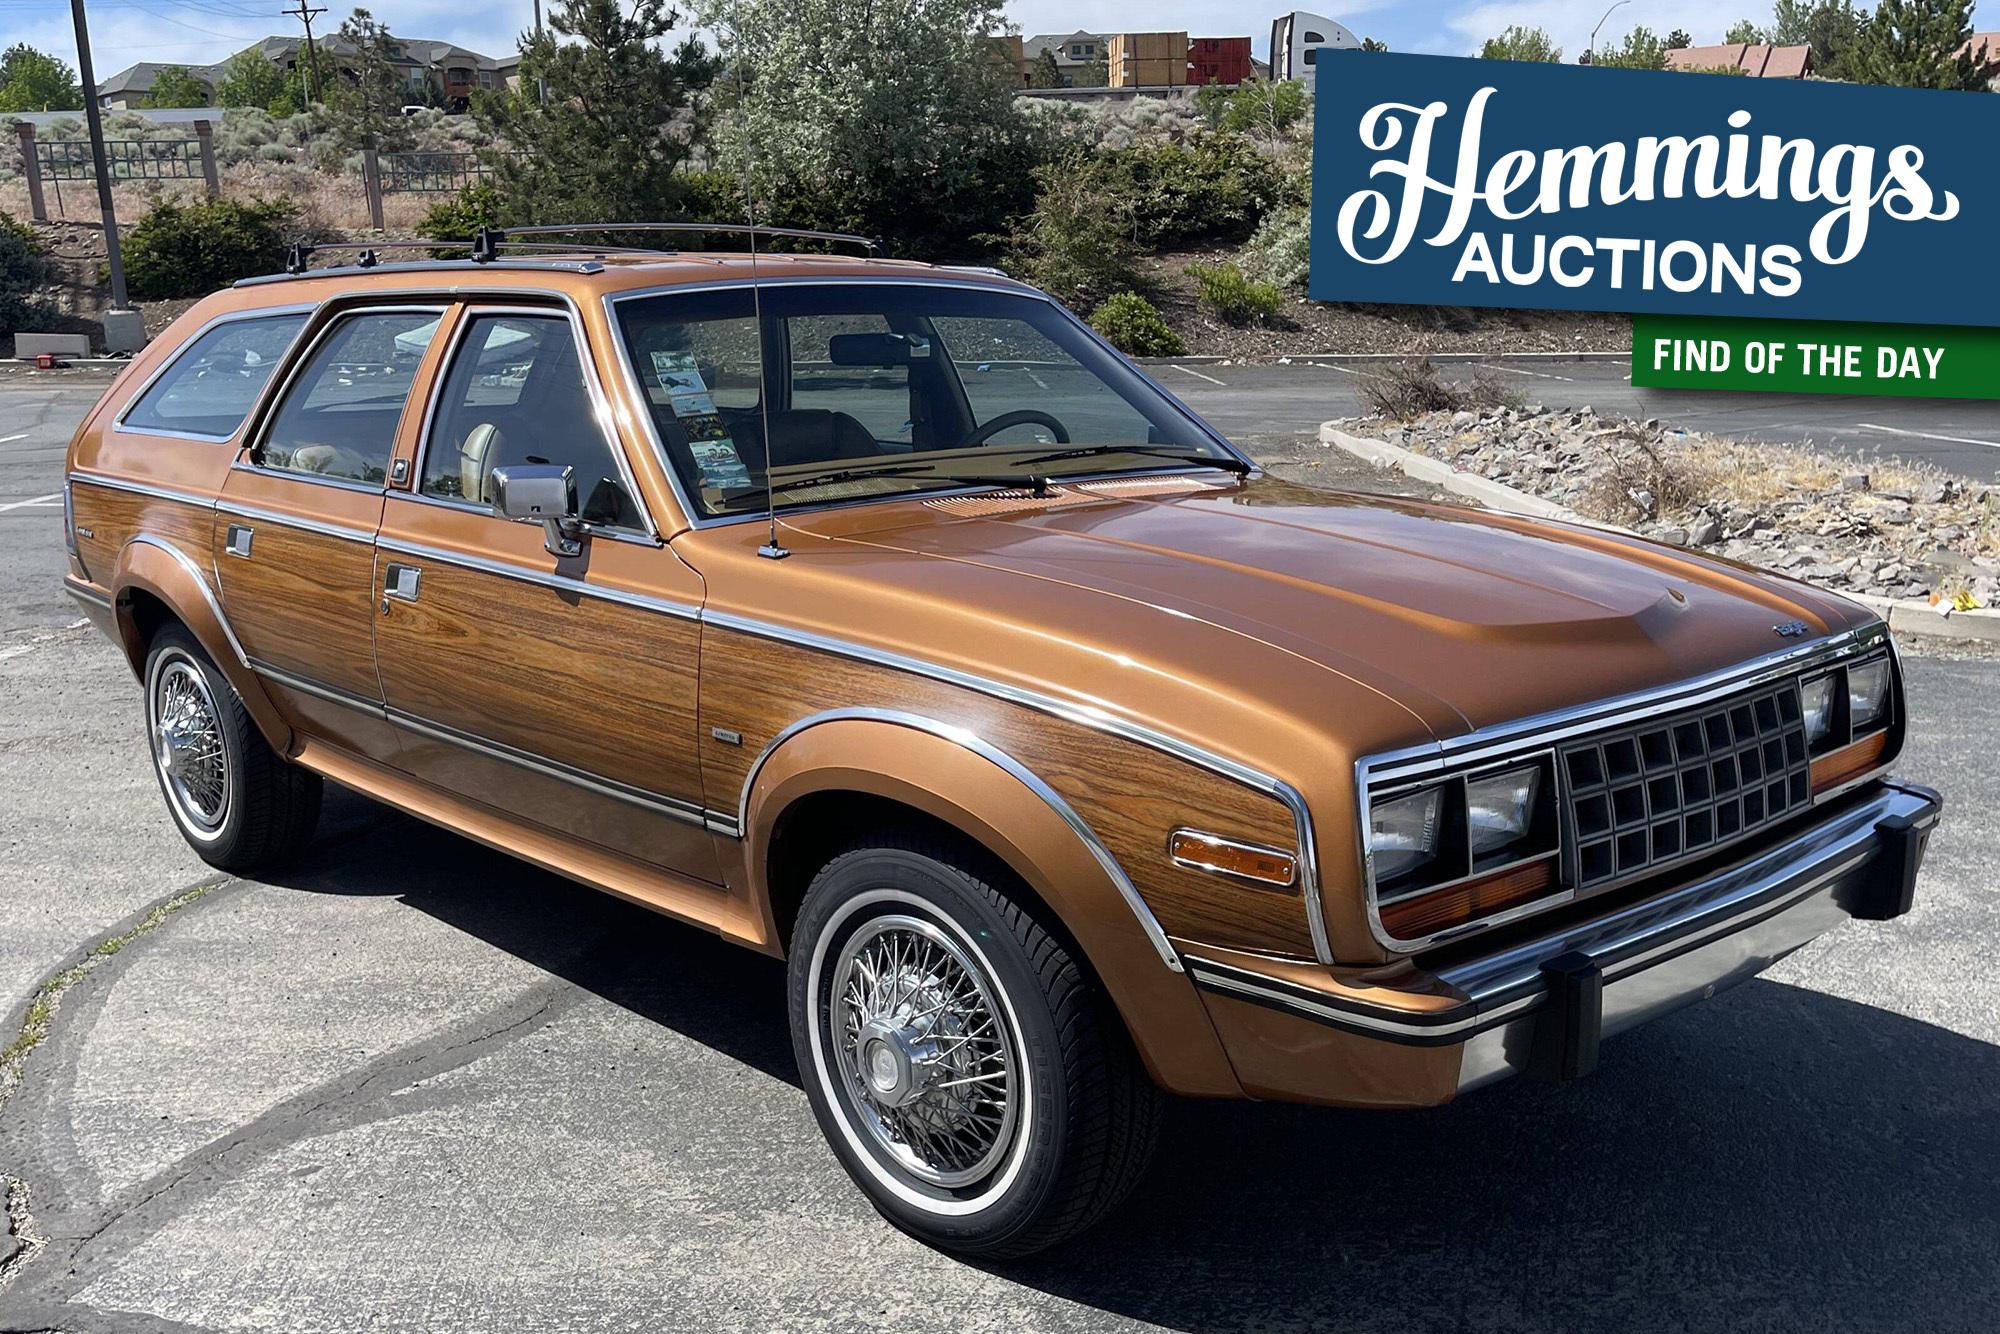 Woodgrained brown 1986 AMC Eagle station wagon is exemplary in the strictest sense of the word